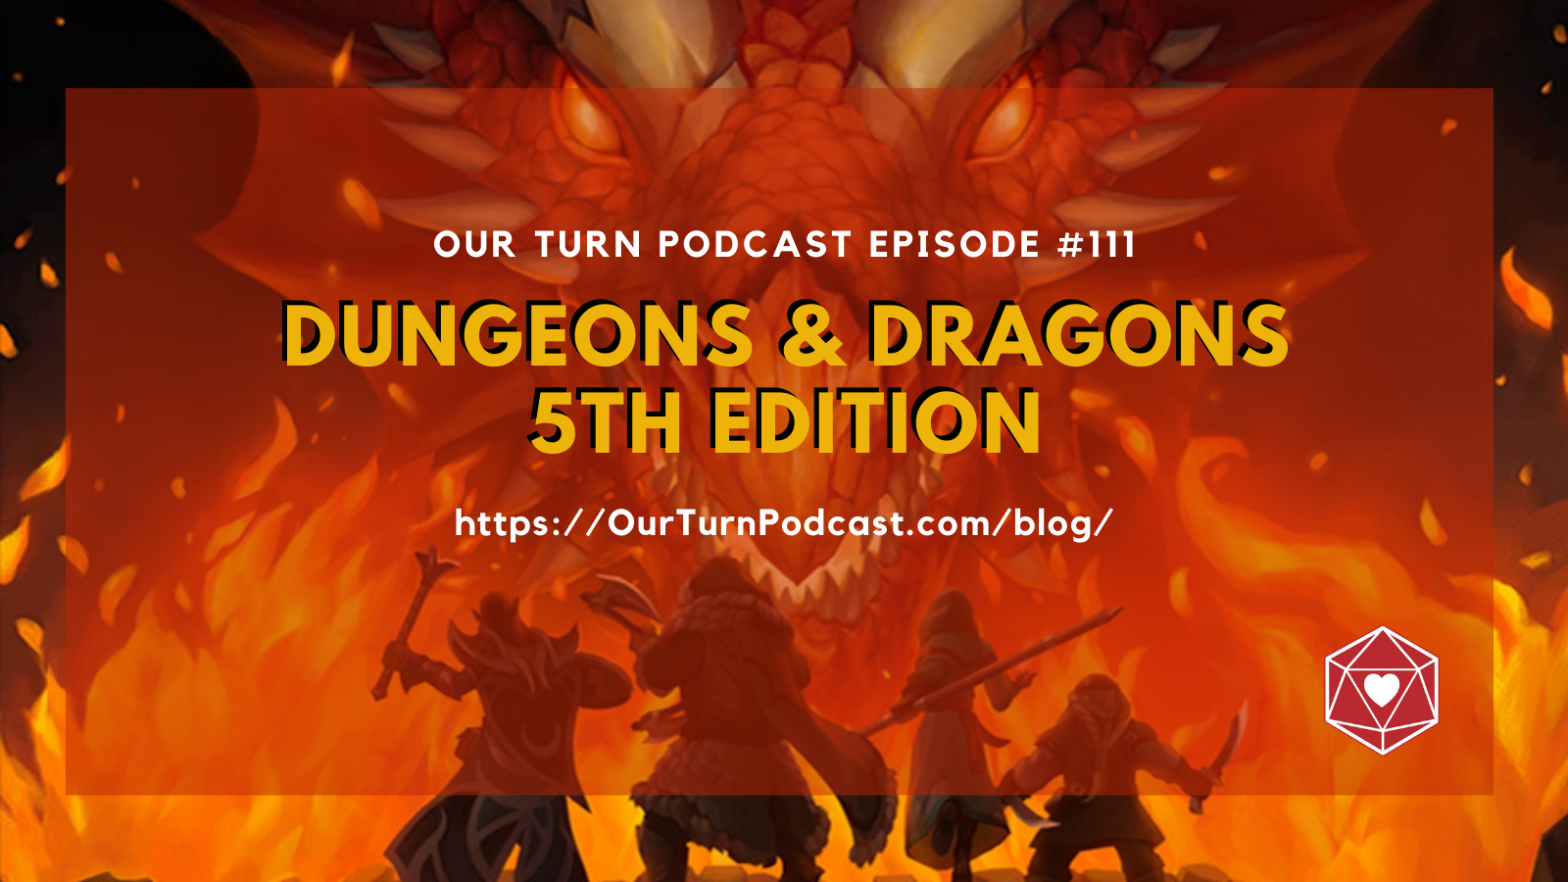 Our Turn Podcast Episode #111 Dungeons & Dragons 5th Edition